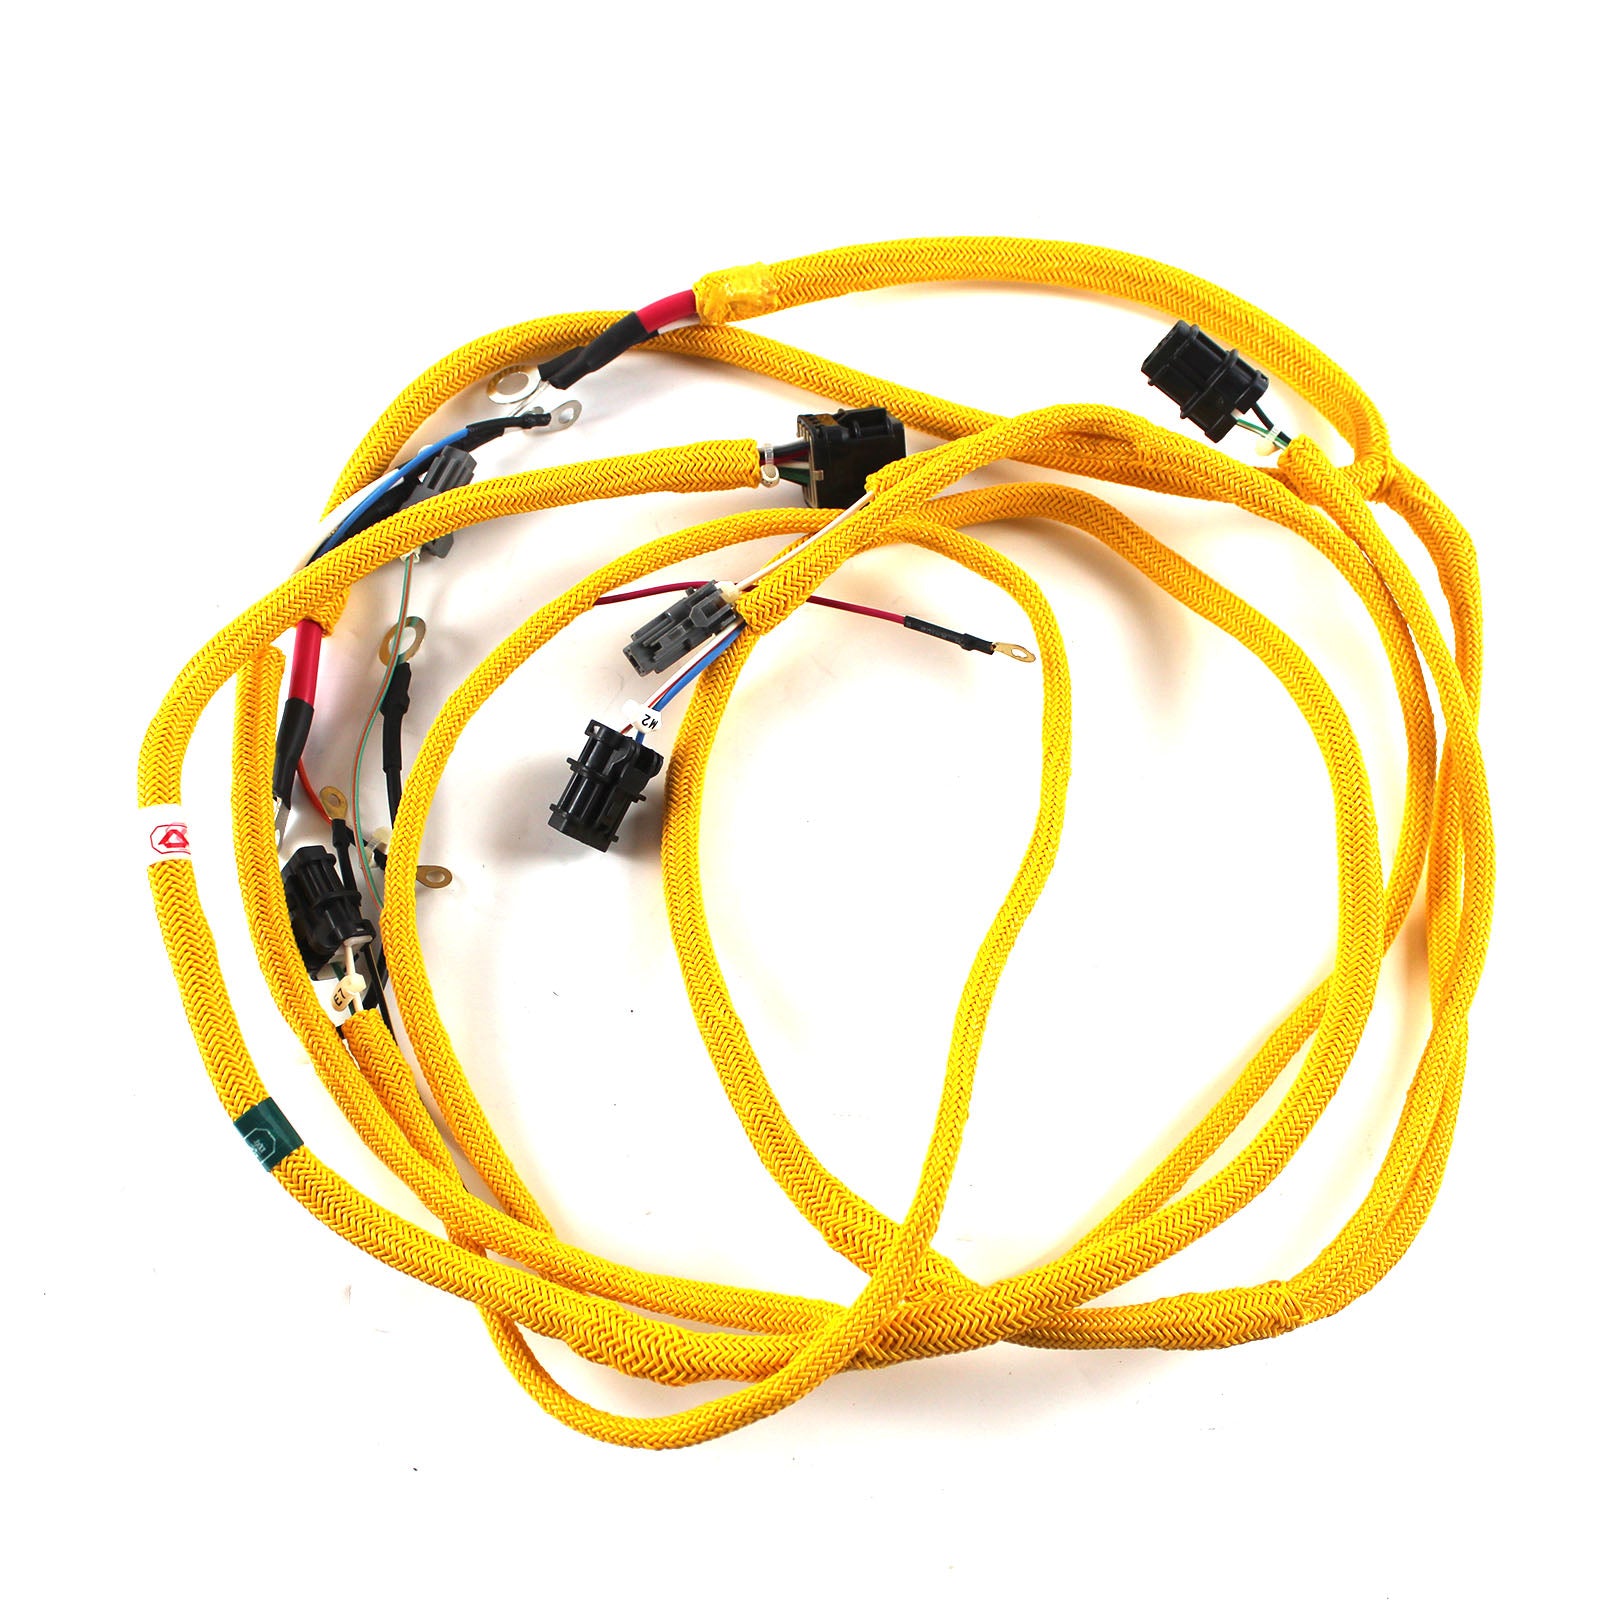 6207-81-4351 Engine harness for PC200-6 PC210-6 PC220-6 Excavator 6D95 Engine